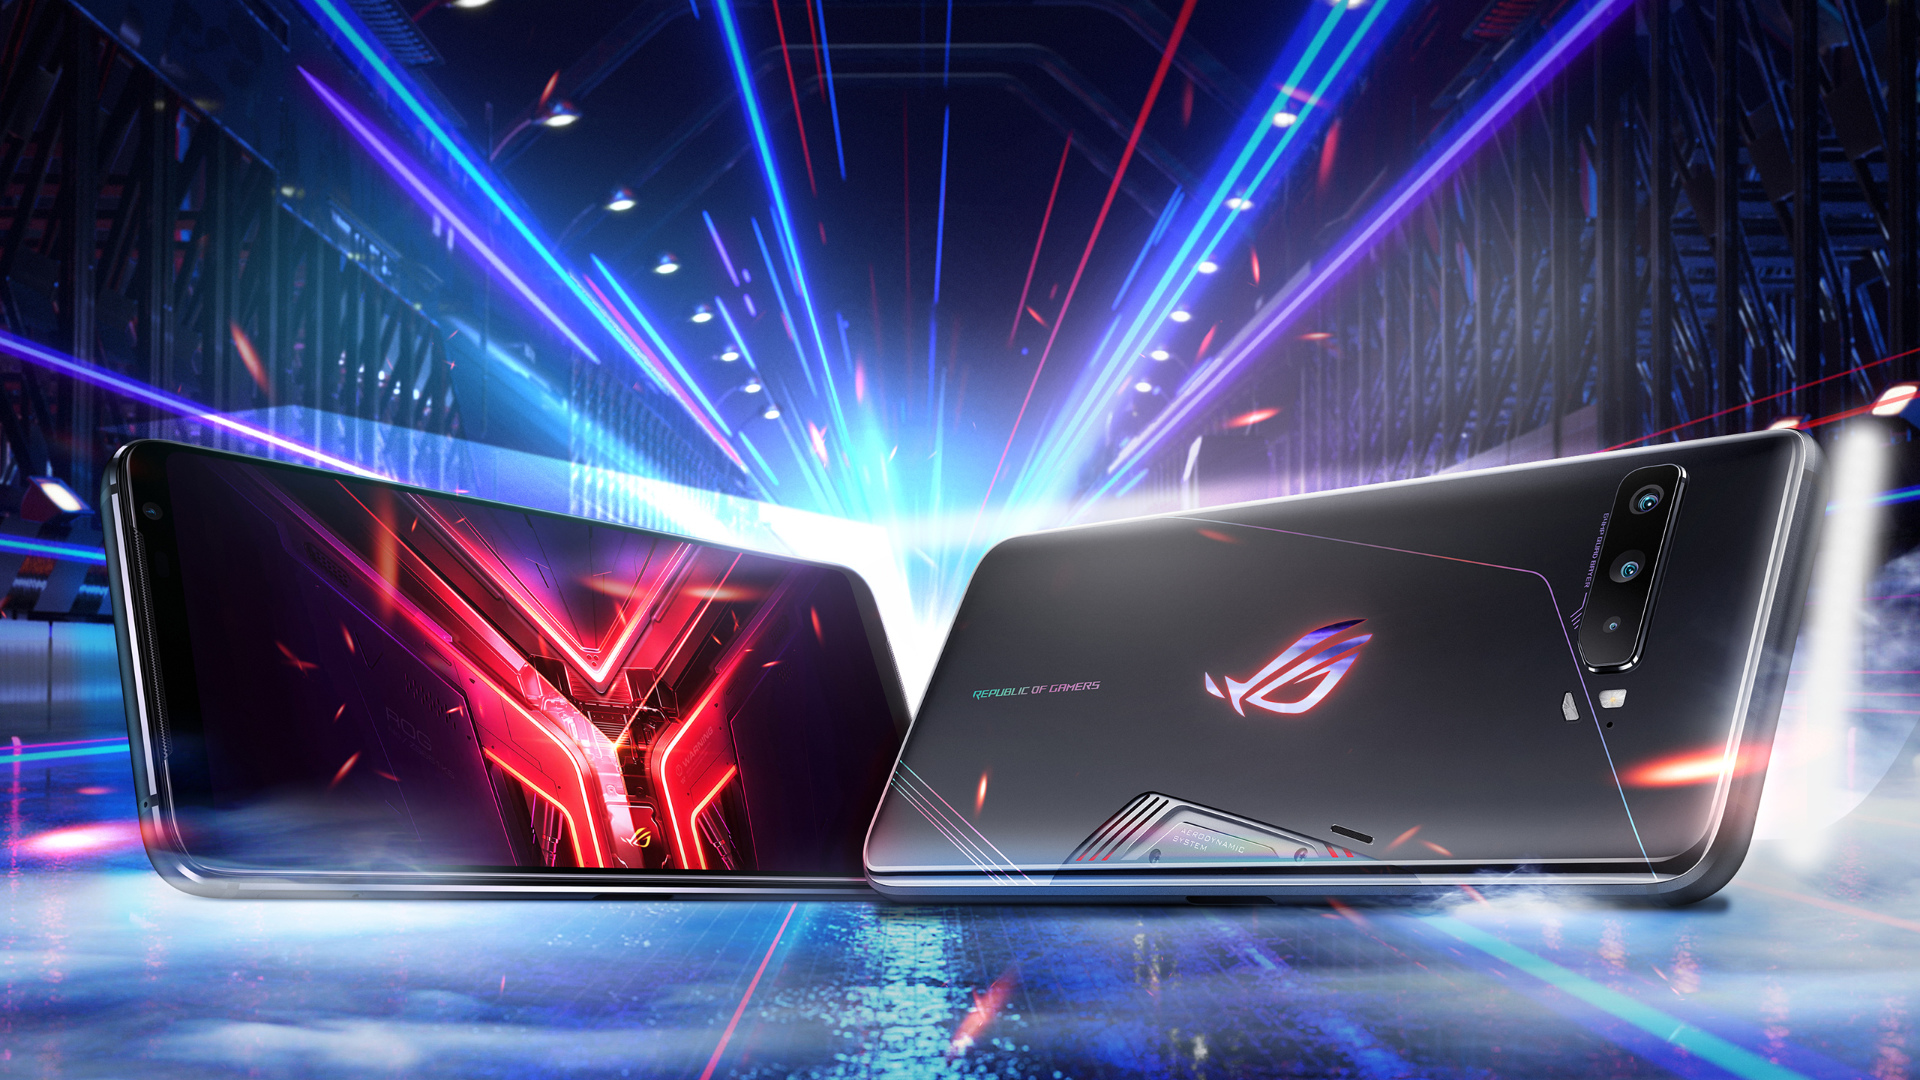 The Asus ROG Phone 3 is packed to the brim with gamer-focused features